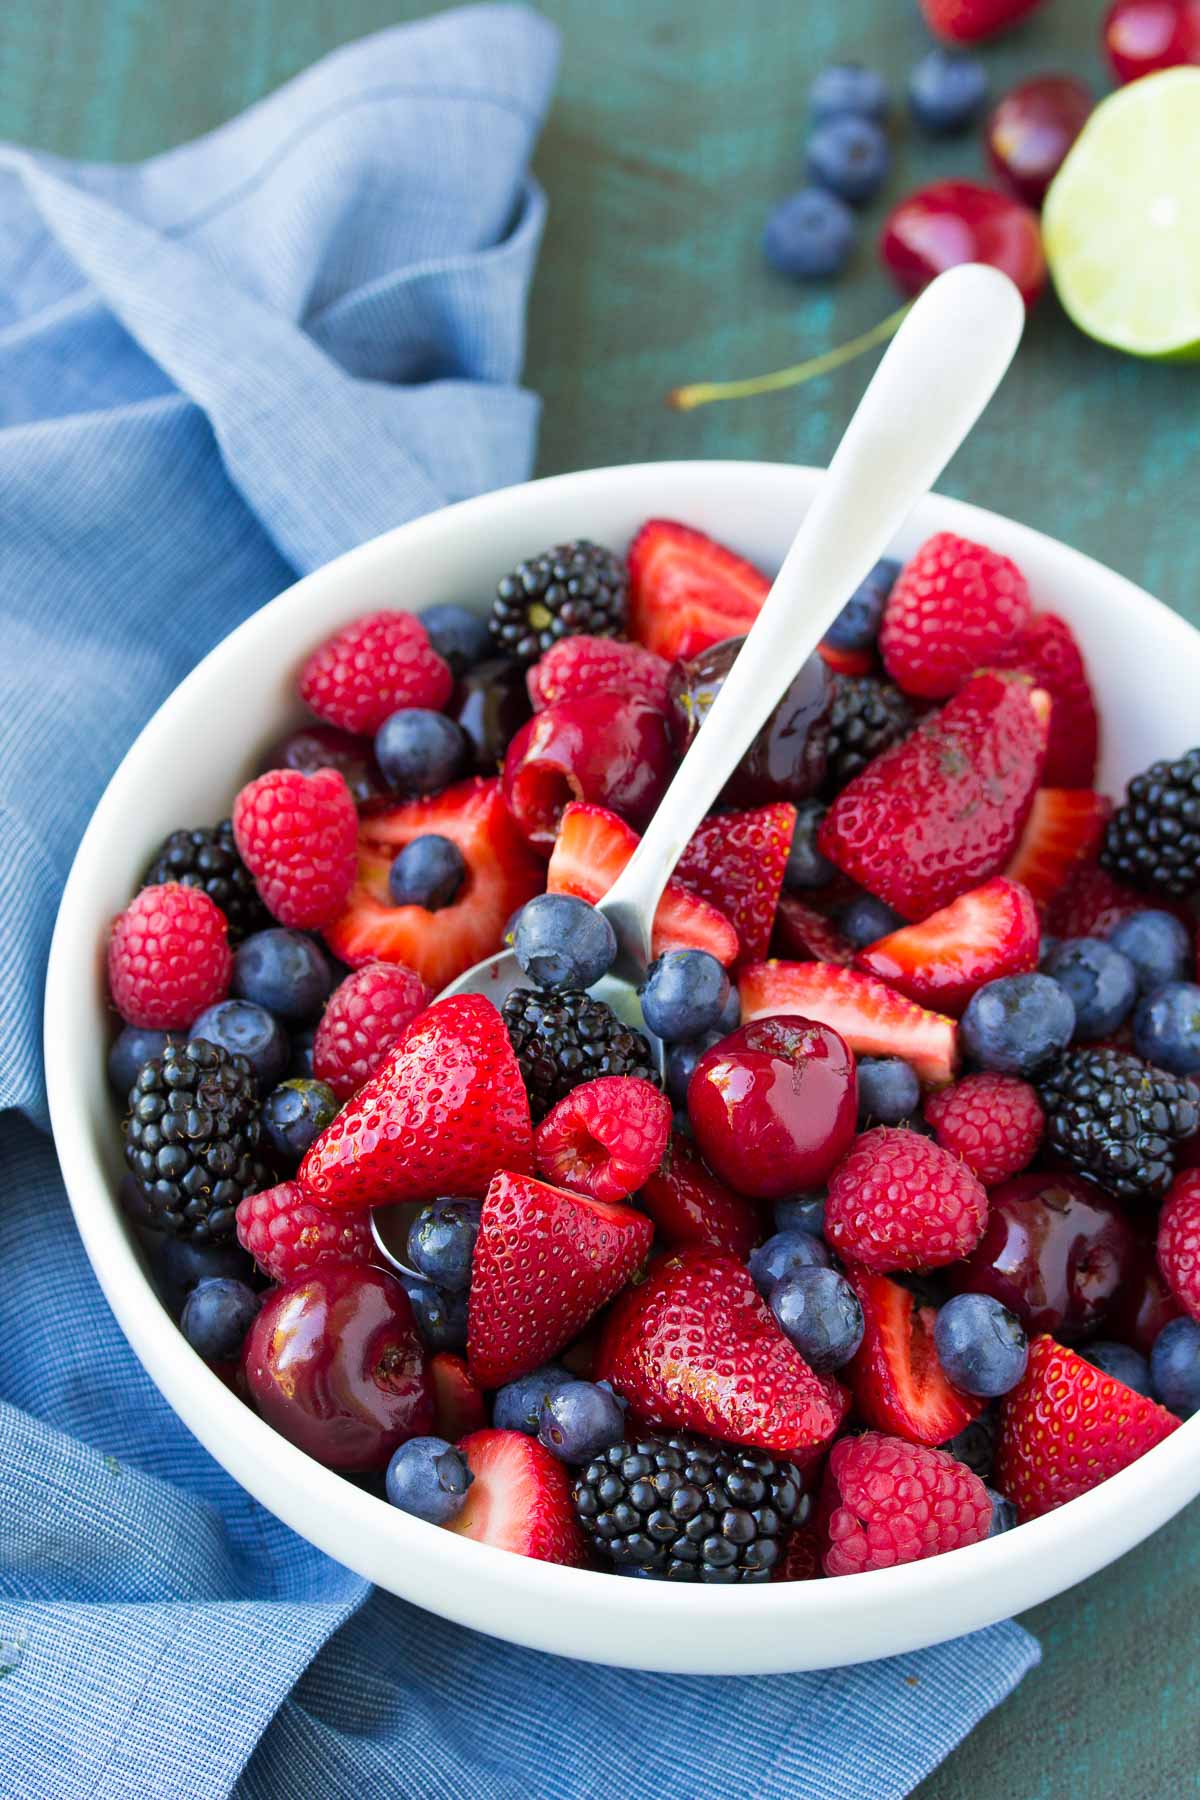 The BEST Fruit Salad - Refreshing and Delicious!